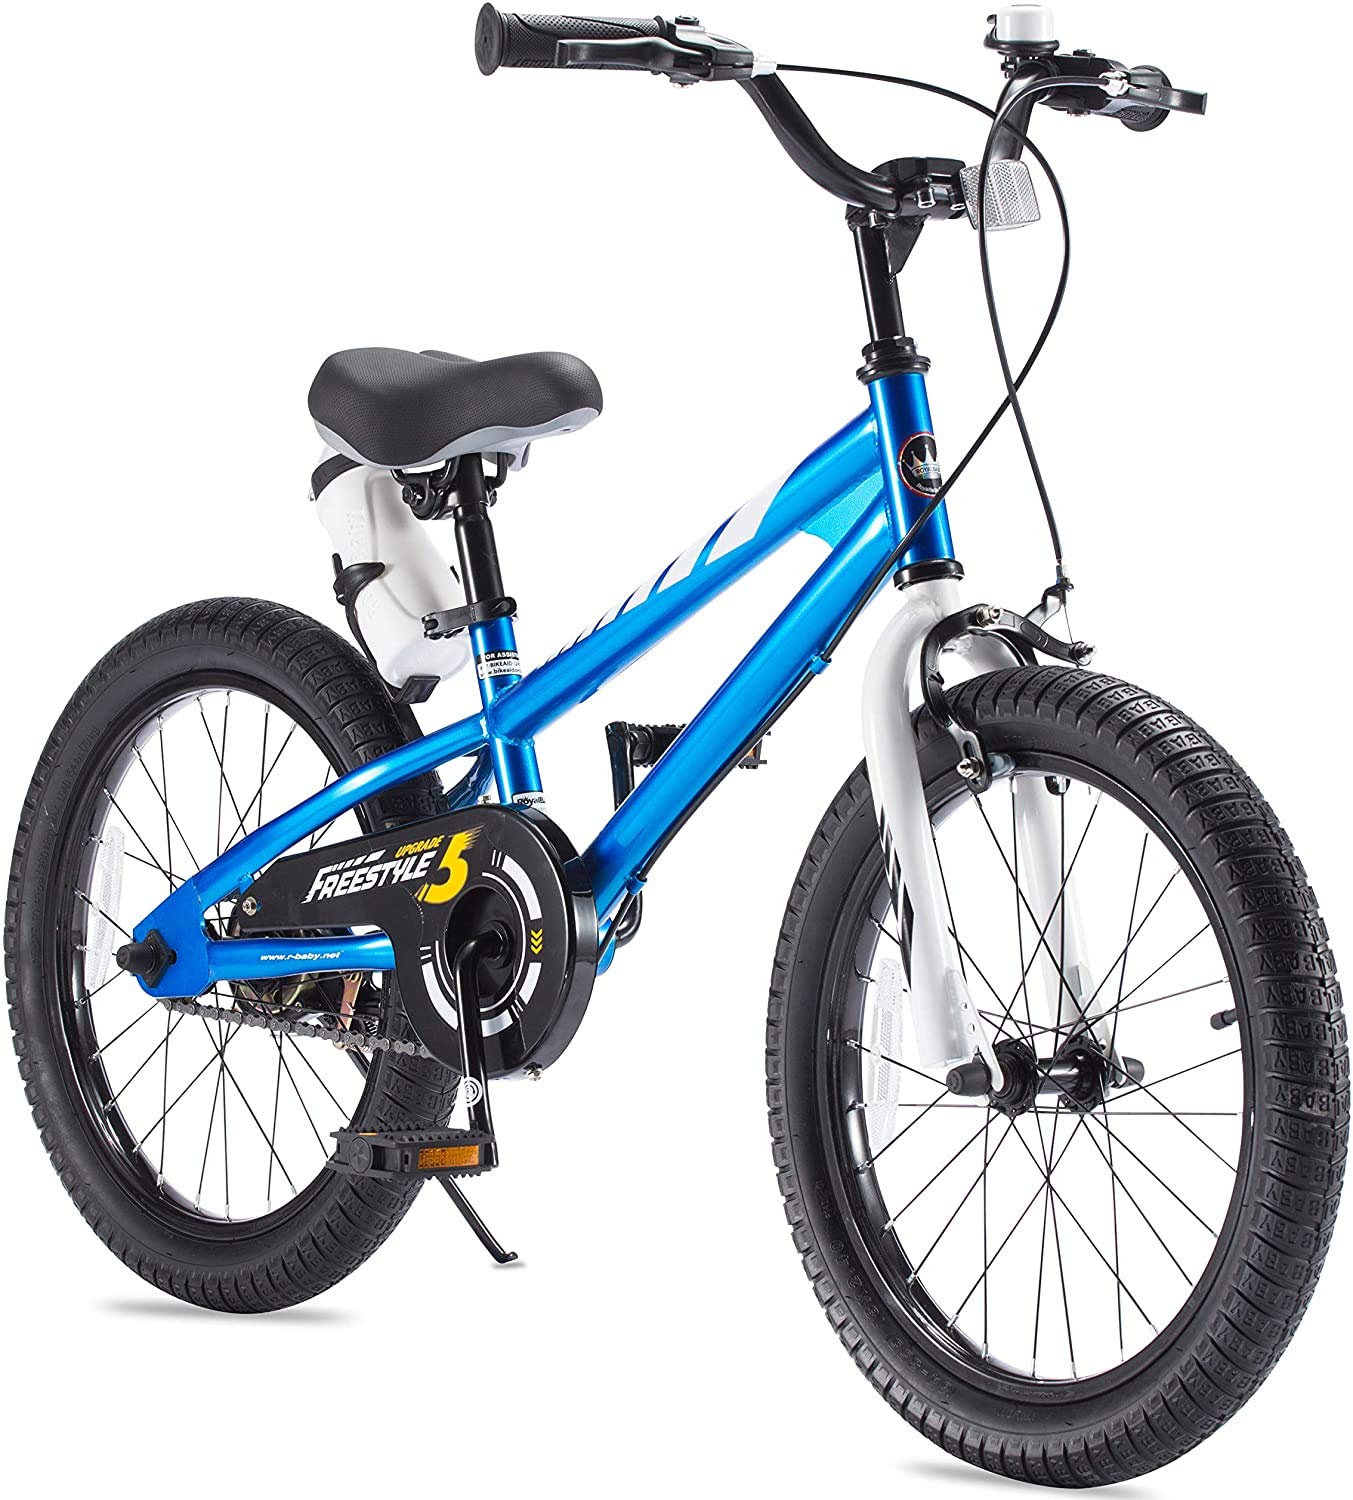 RoyalBaby BMX Freestyle Kid's Bike with Two Hand Brakes, Tool Free Pedal Assembly Boy's Bike and Girl's Bike, Training Wheels for 12" 14" 16", Kickstand for 16" 18" Bicycle, Blue Color (18 Inch)